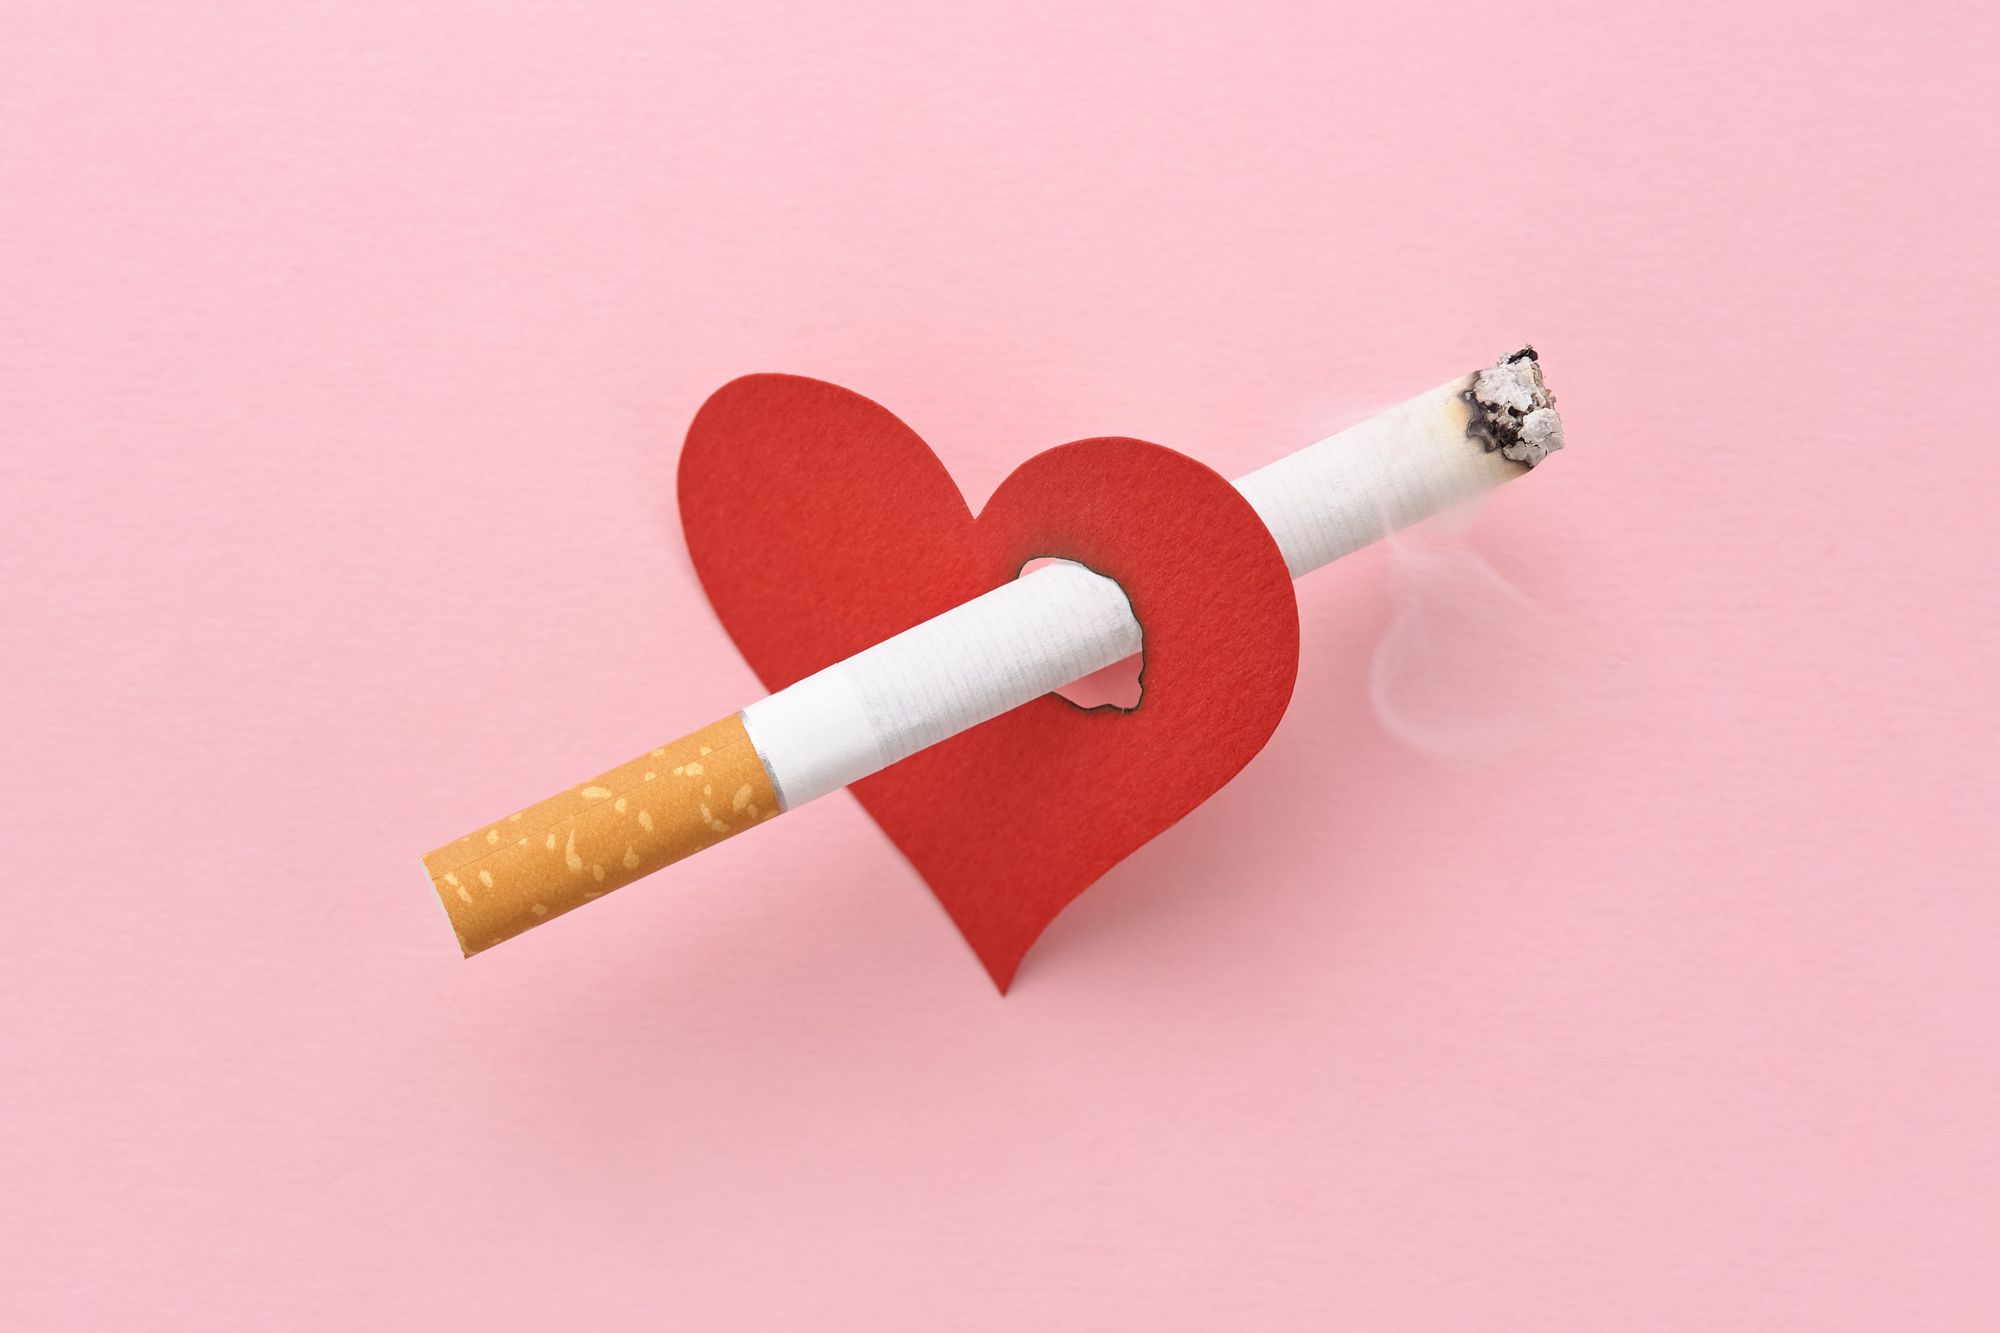 Is It Possible To Reverse Erectile Dysfunction With Smoking?